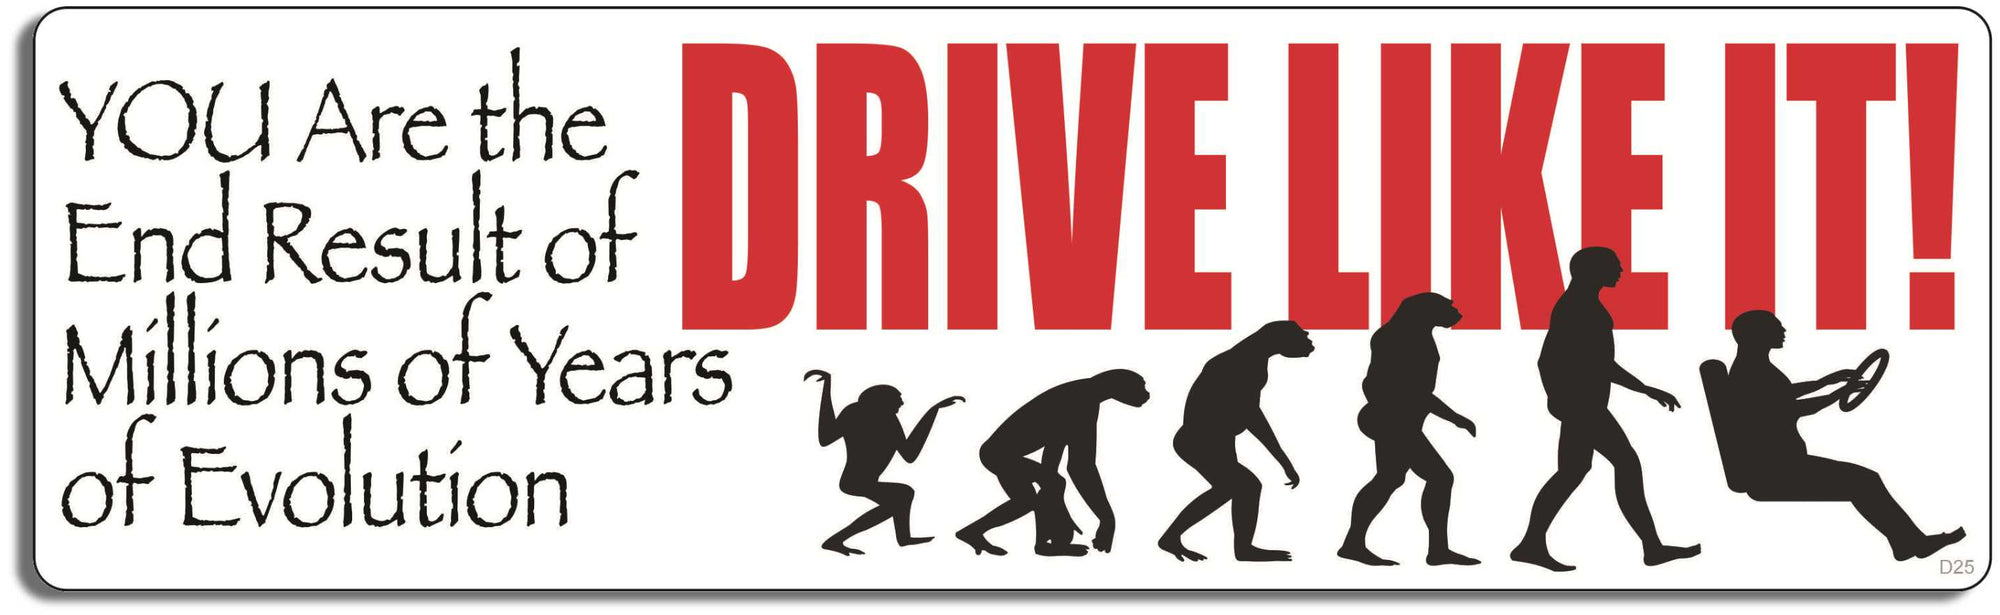 You are the product of millions of years of evolution. DRIVE LIKE IT! - 3" x 10" Bumper Sticker--Car Magnet- -  Decal Bumper Sticker-funny Bumper Sticker Car Magnet You are the product of millions of-  Decal for carsdrive safely, Driving, Funny, safe driving, tailgaters, tailgating